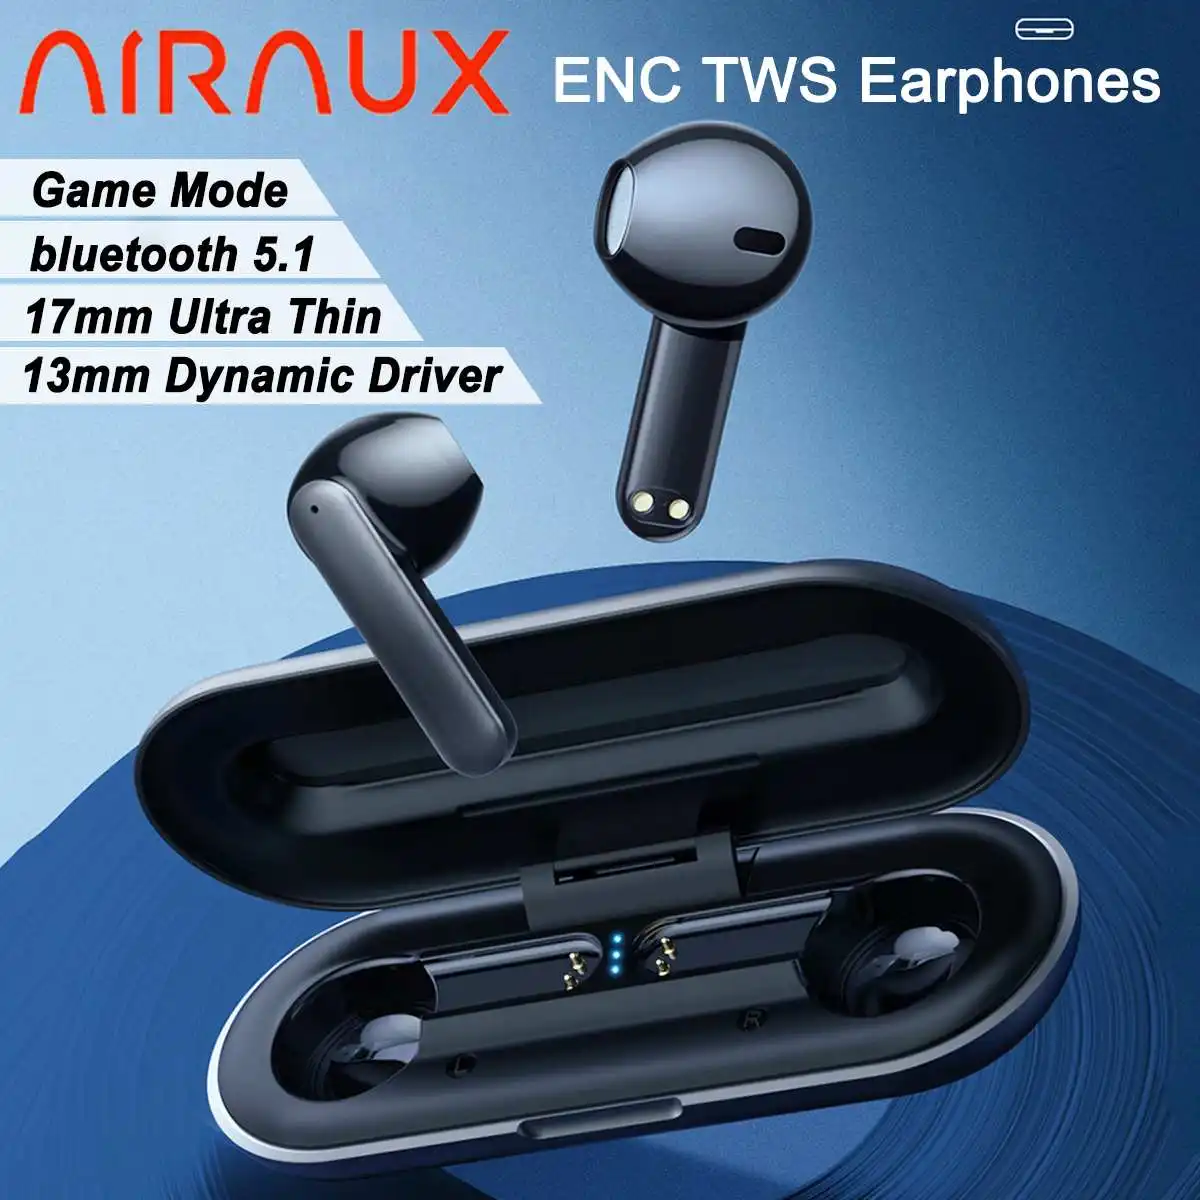 

AirAux AA-UM15 TWS Earphones bluetooth V5.1 QCC3040 Chip 13mm Dynamic Driver HiFi Stereo Low Delay Game Mode ENC Sports Headset